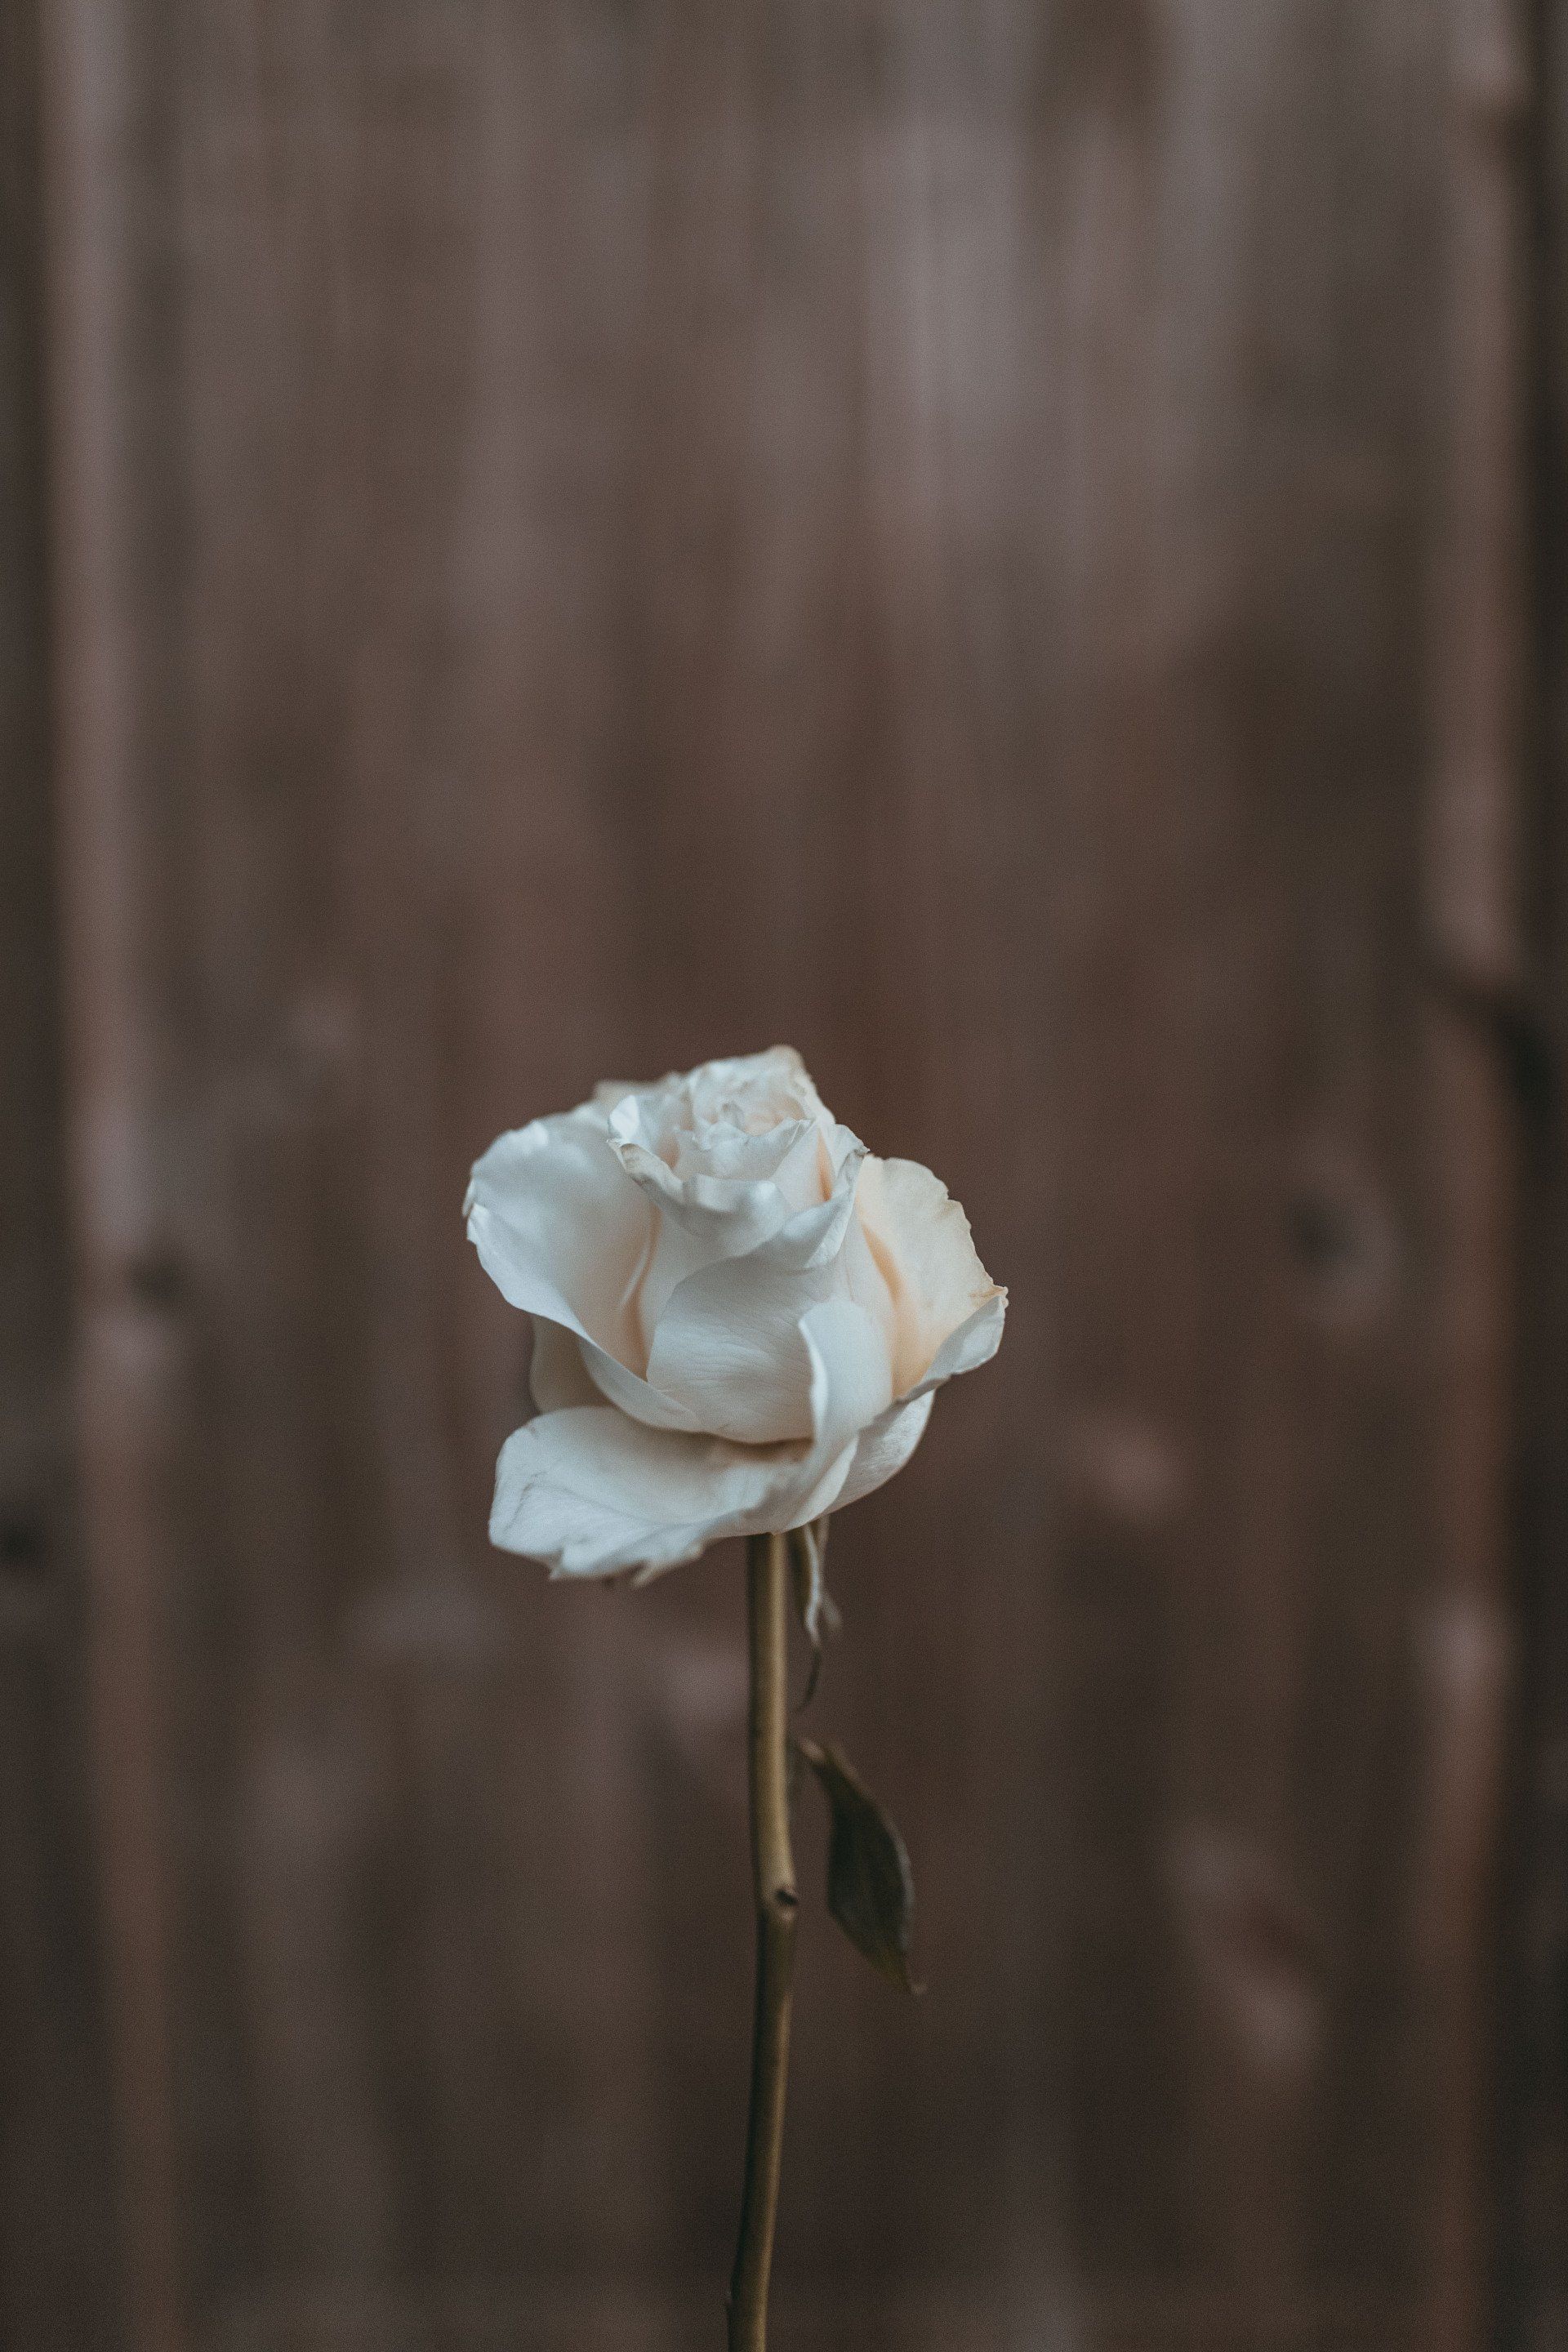 a single white rose against a wooden background